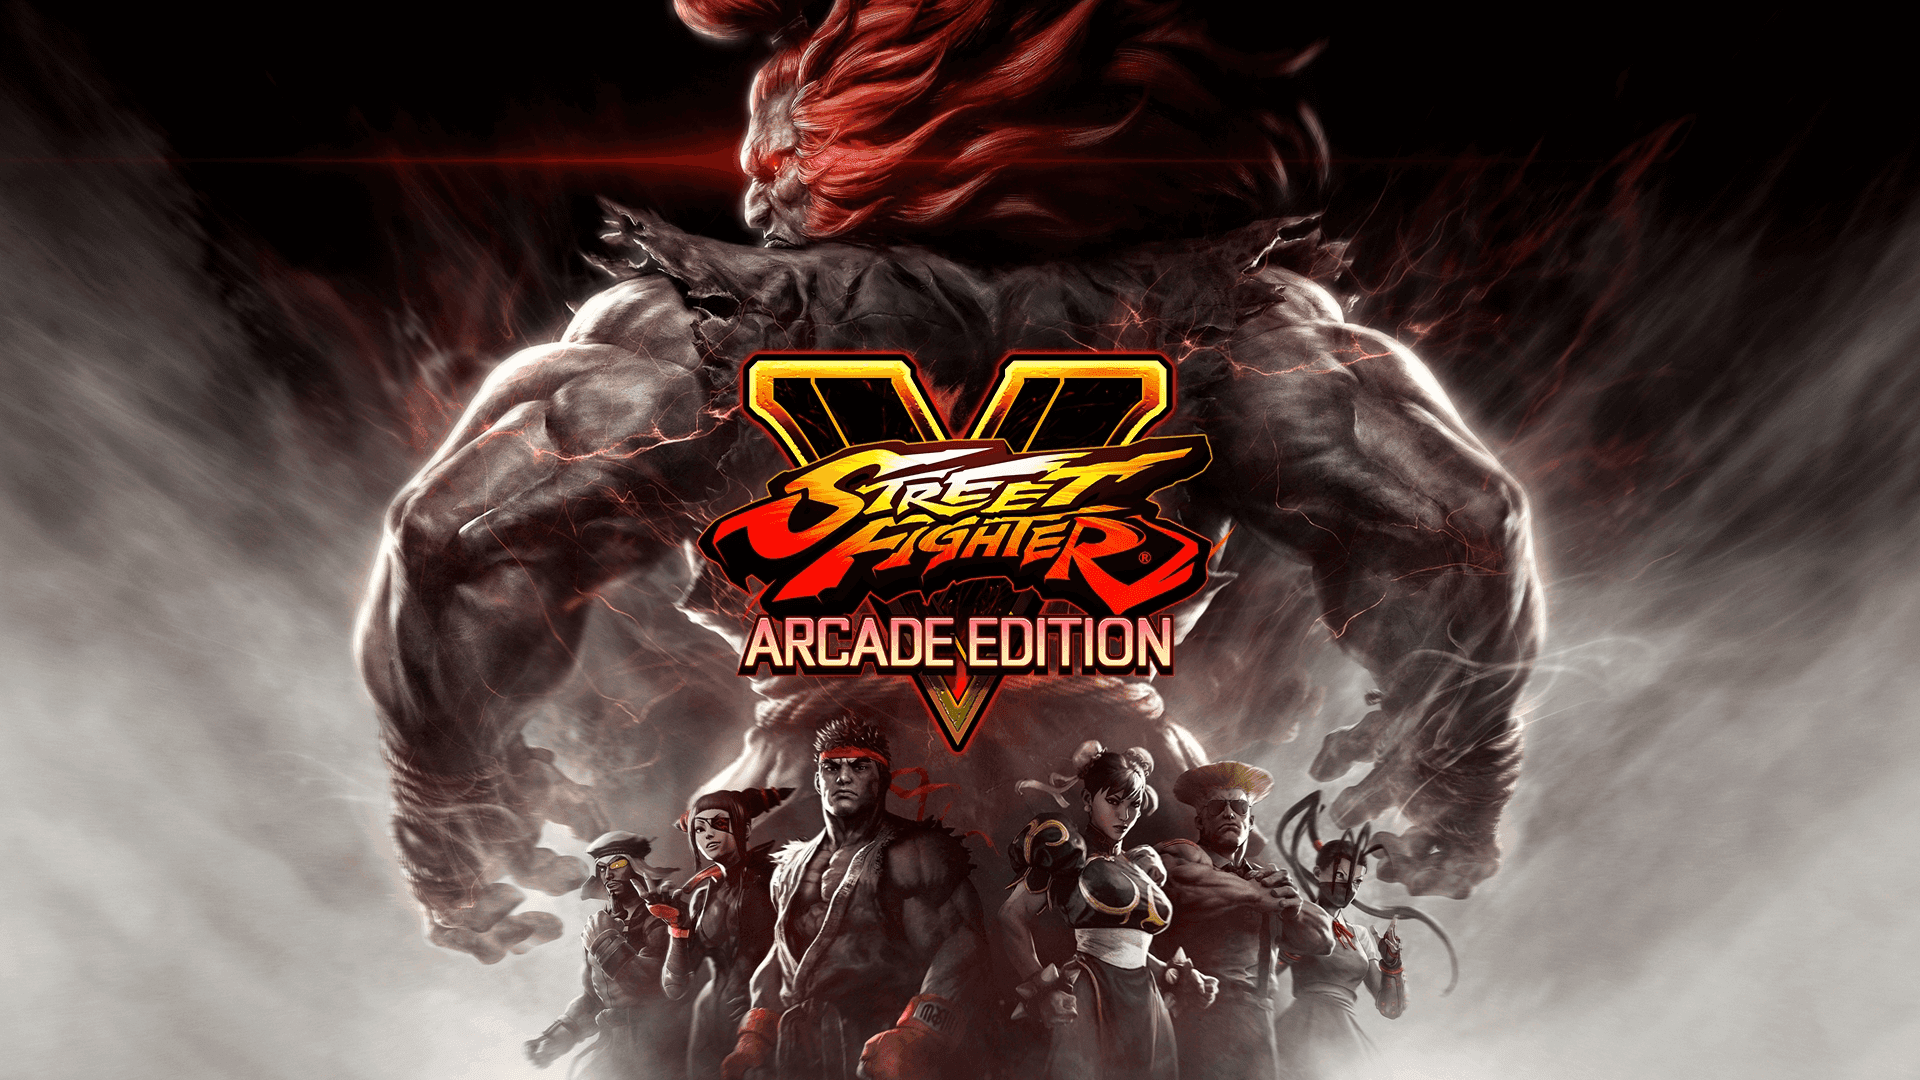 Street Fighter V Type Arcade feature image